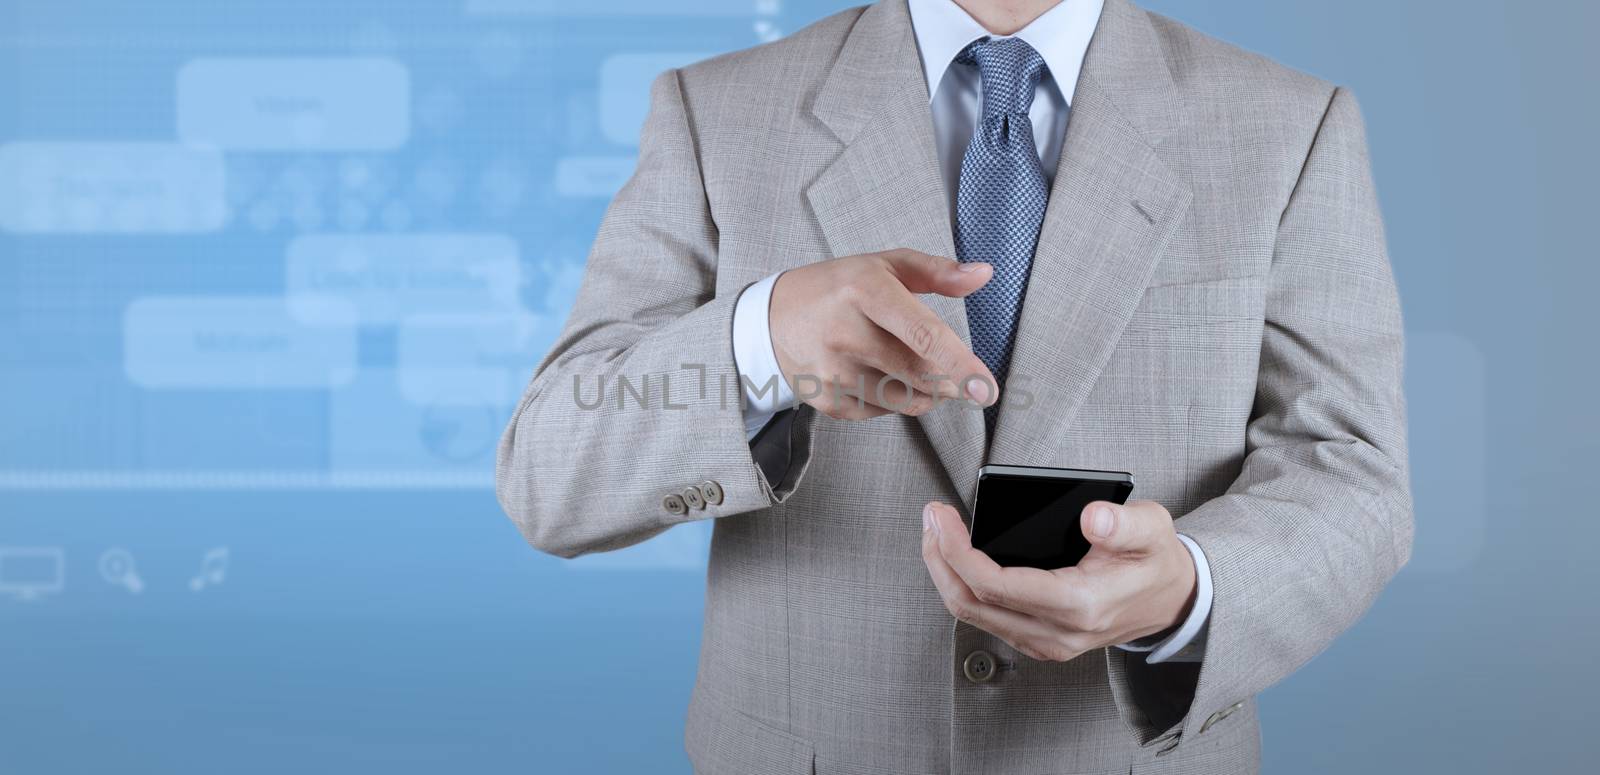 businessman with mobile phone on webinar screen background as concept